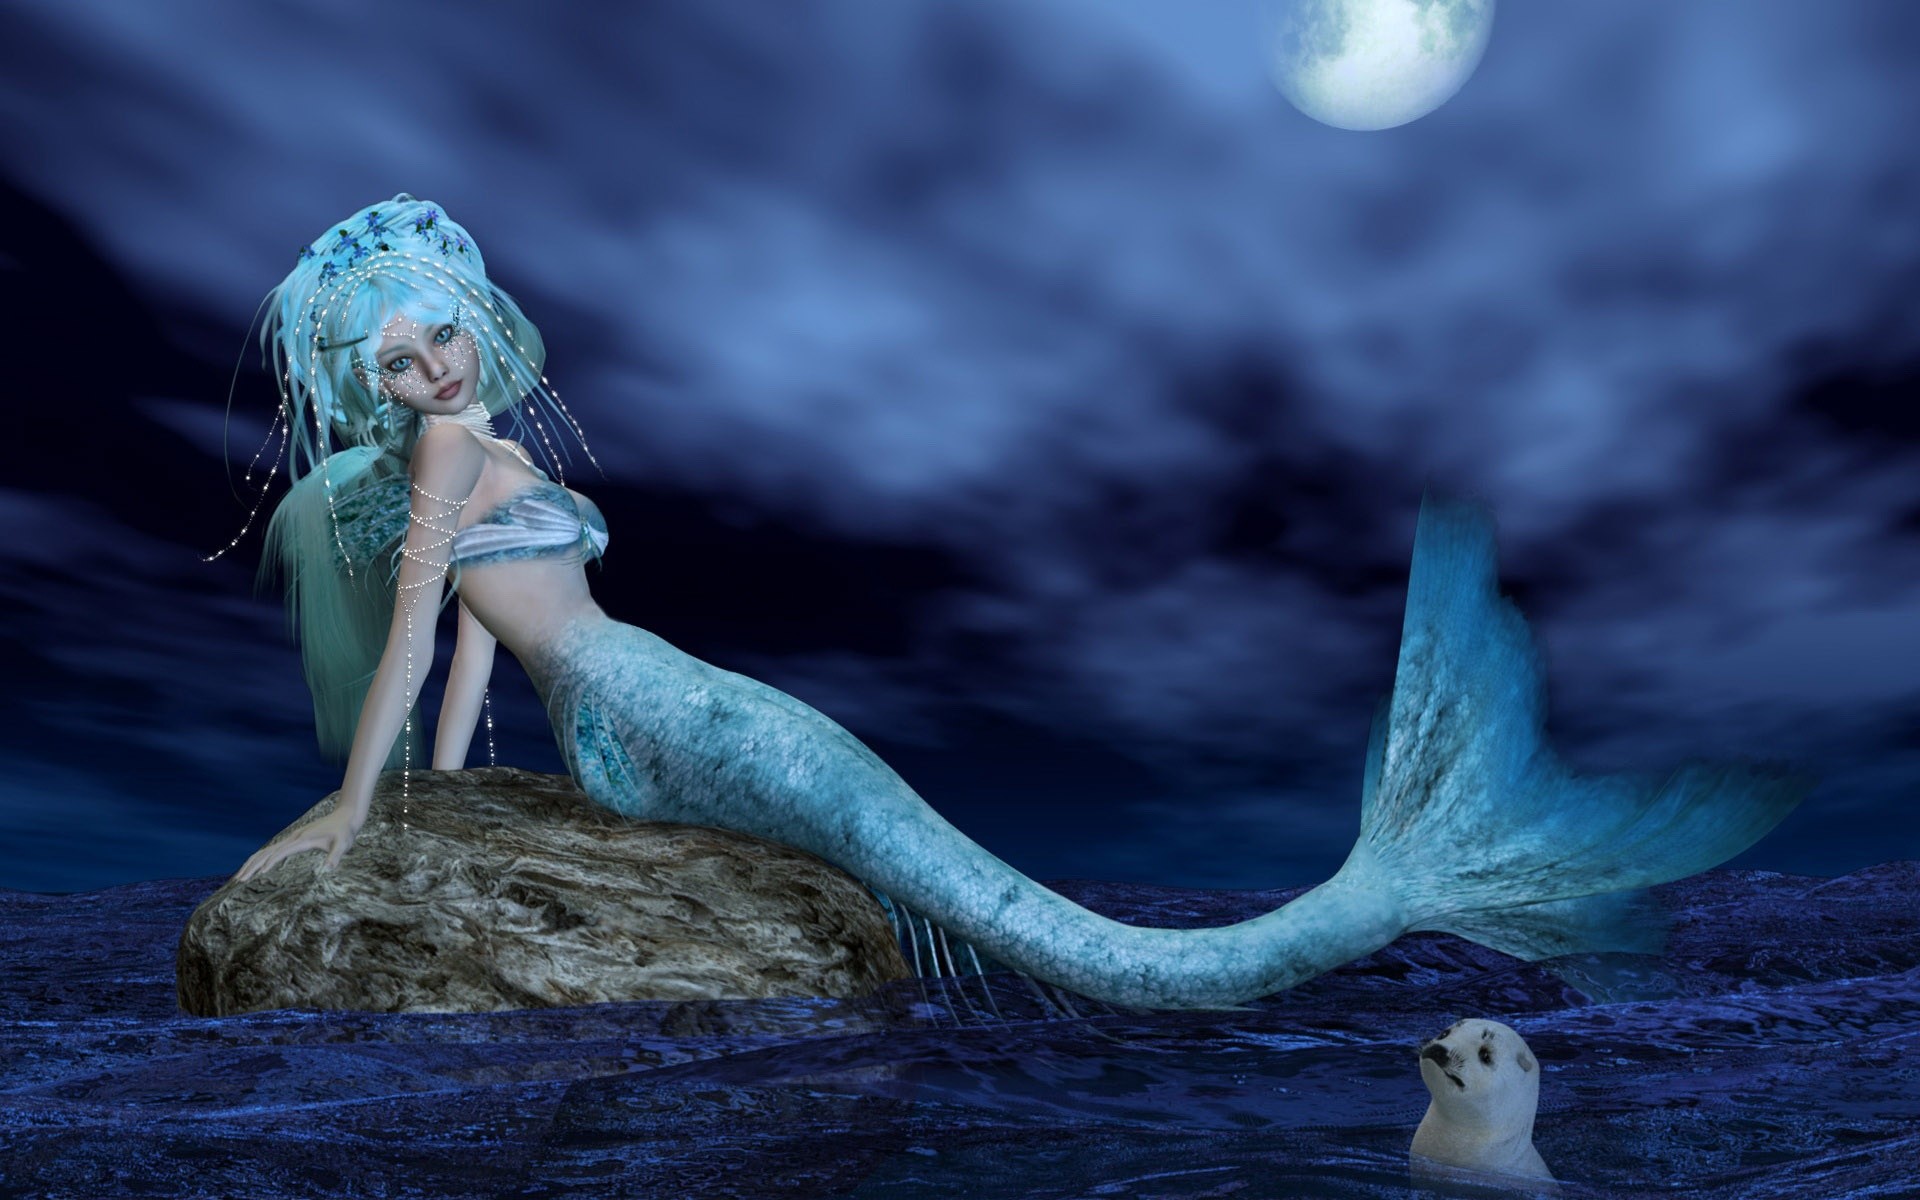 Mermaid Wallpaper for Computer 62 images